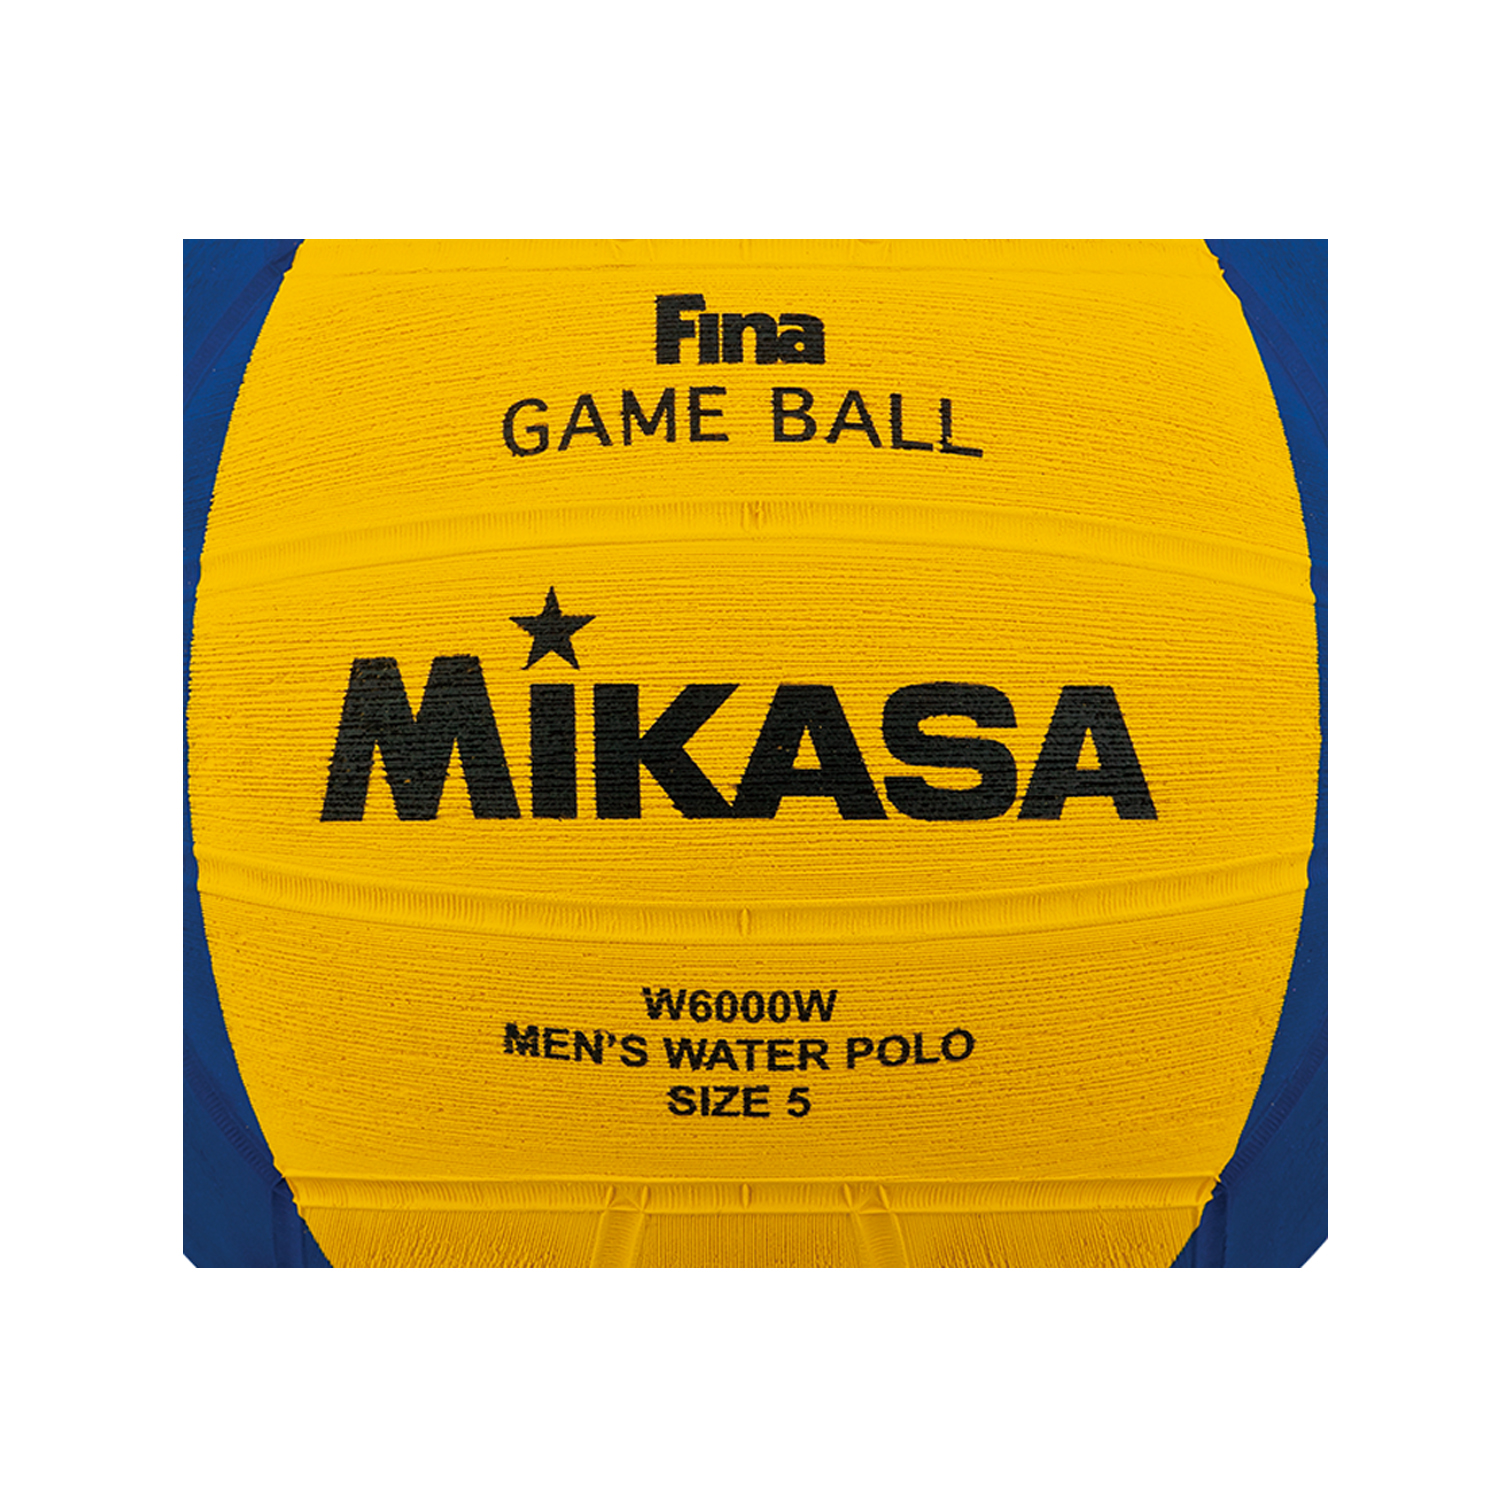 MIKASA W6000W WATER POLO BALL, , large image number null